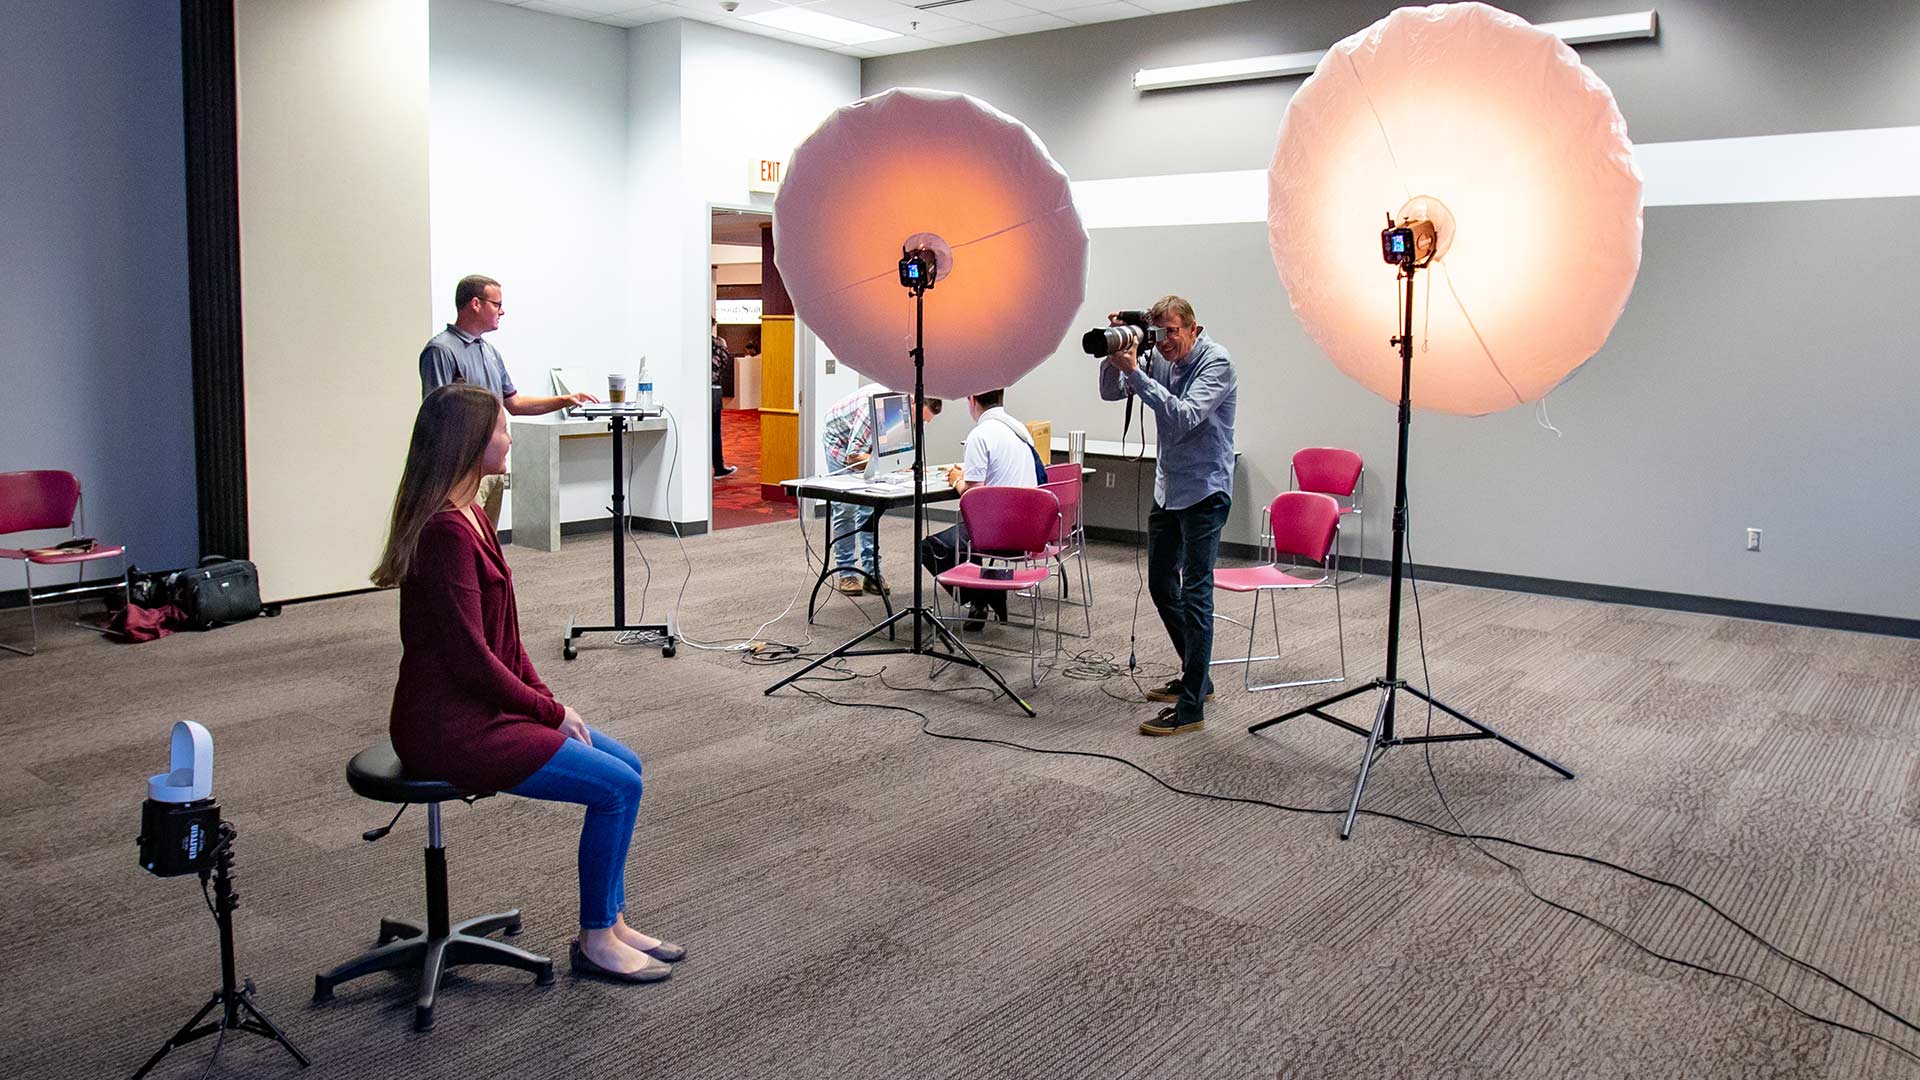 Missouri State University employee having photo taken during free staff and faculty portrait days event.